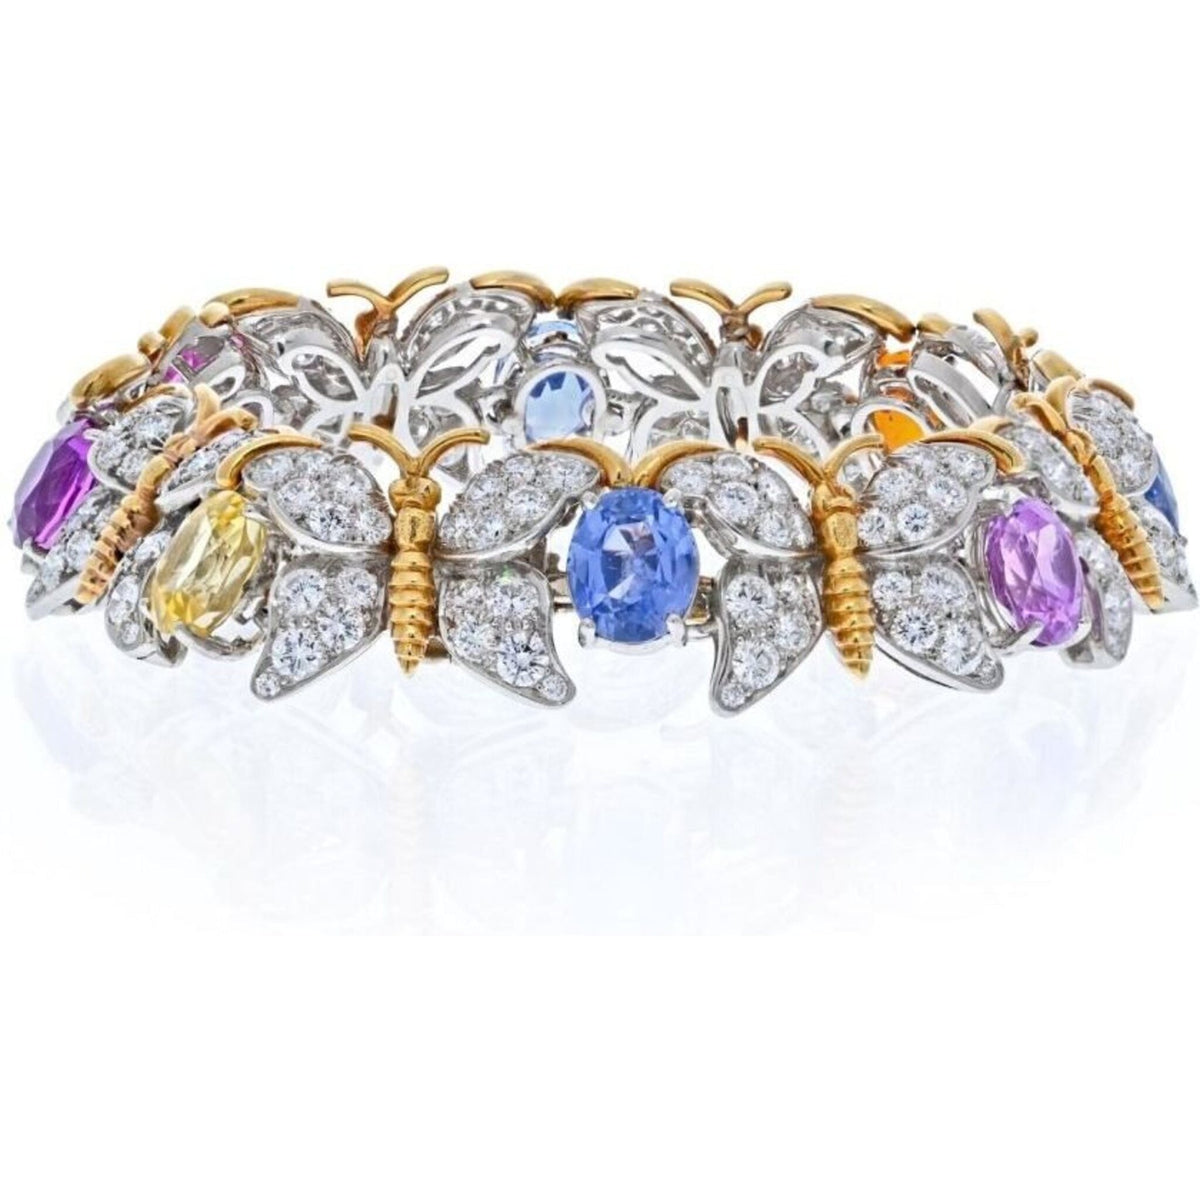 Elegant Butterfly Motif Bracelet by Tiffany and Co. - Robinson's Jewelers